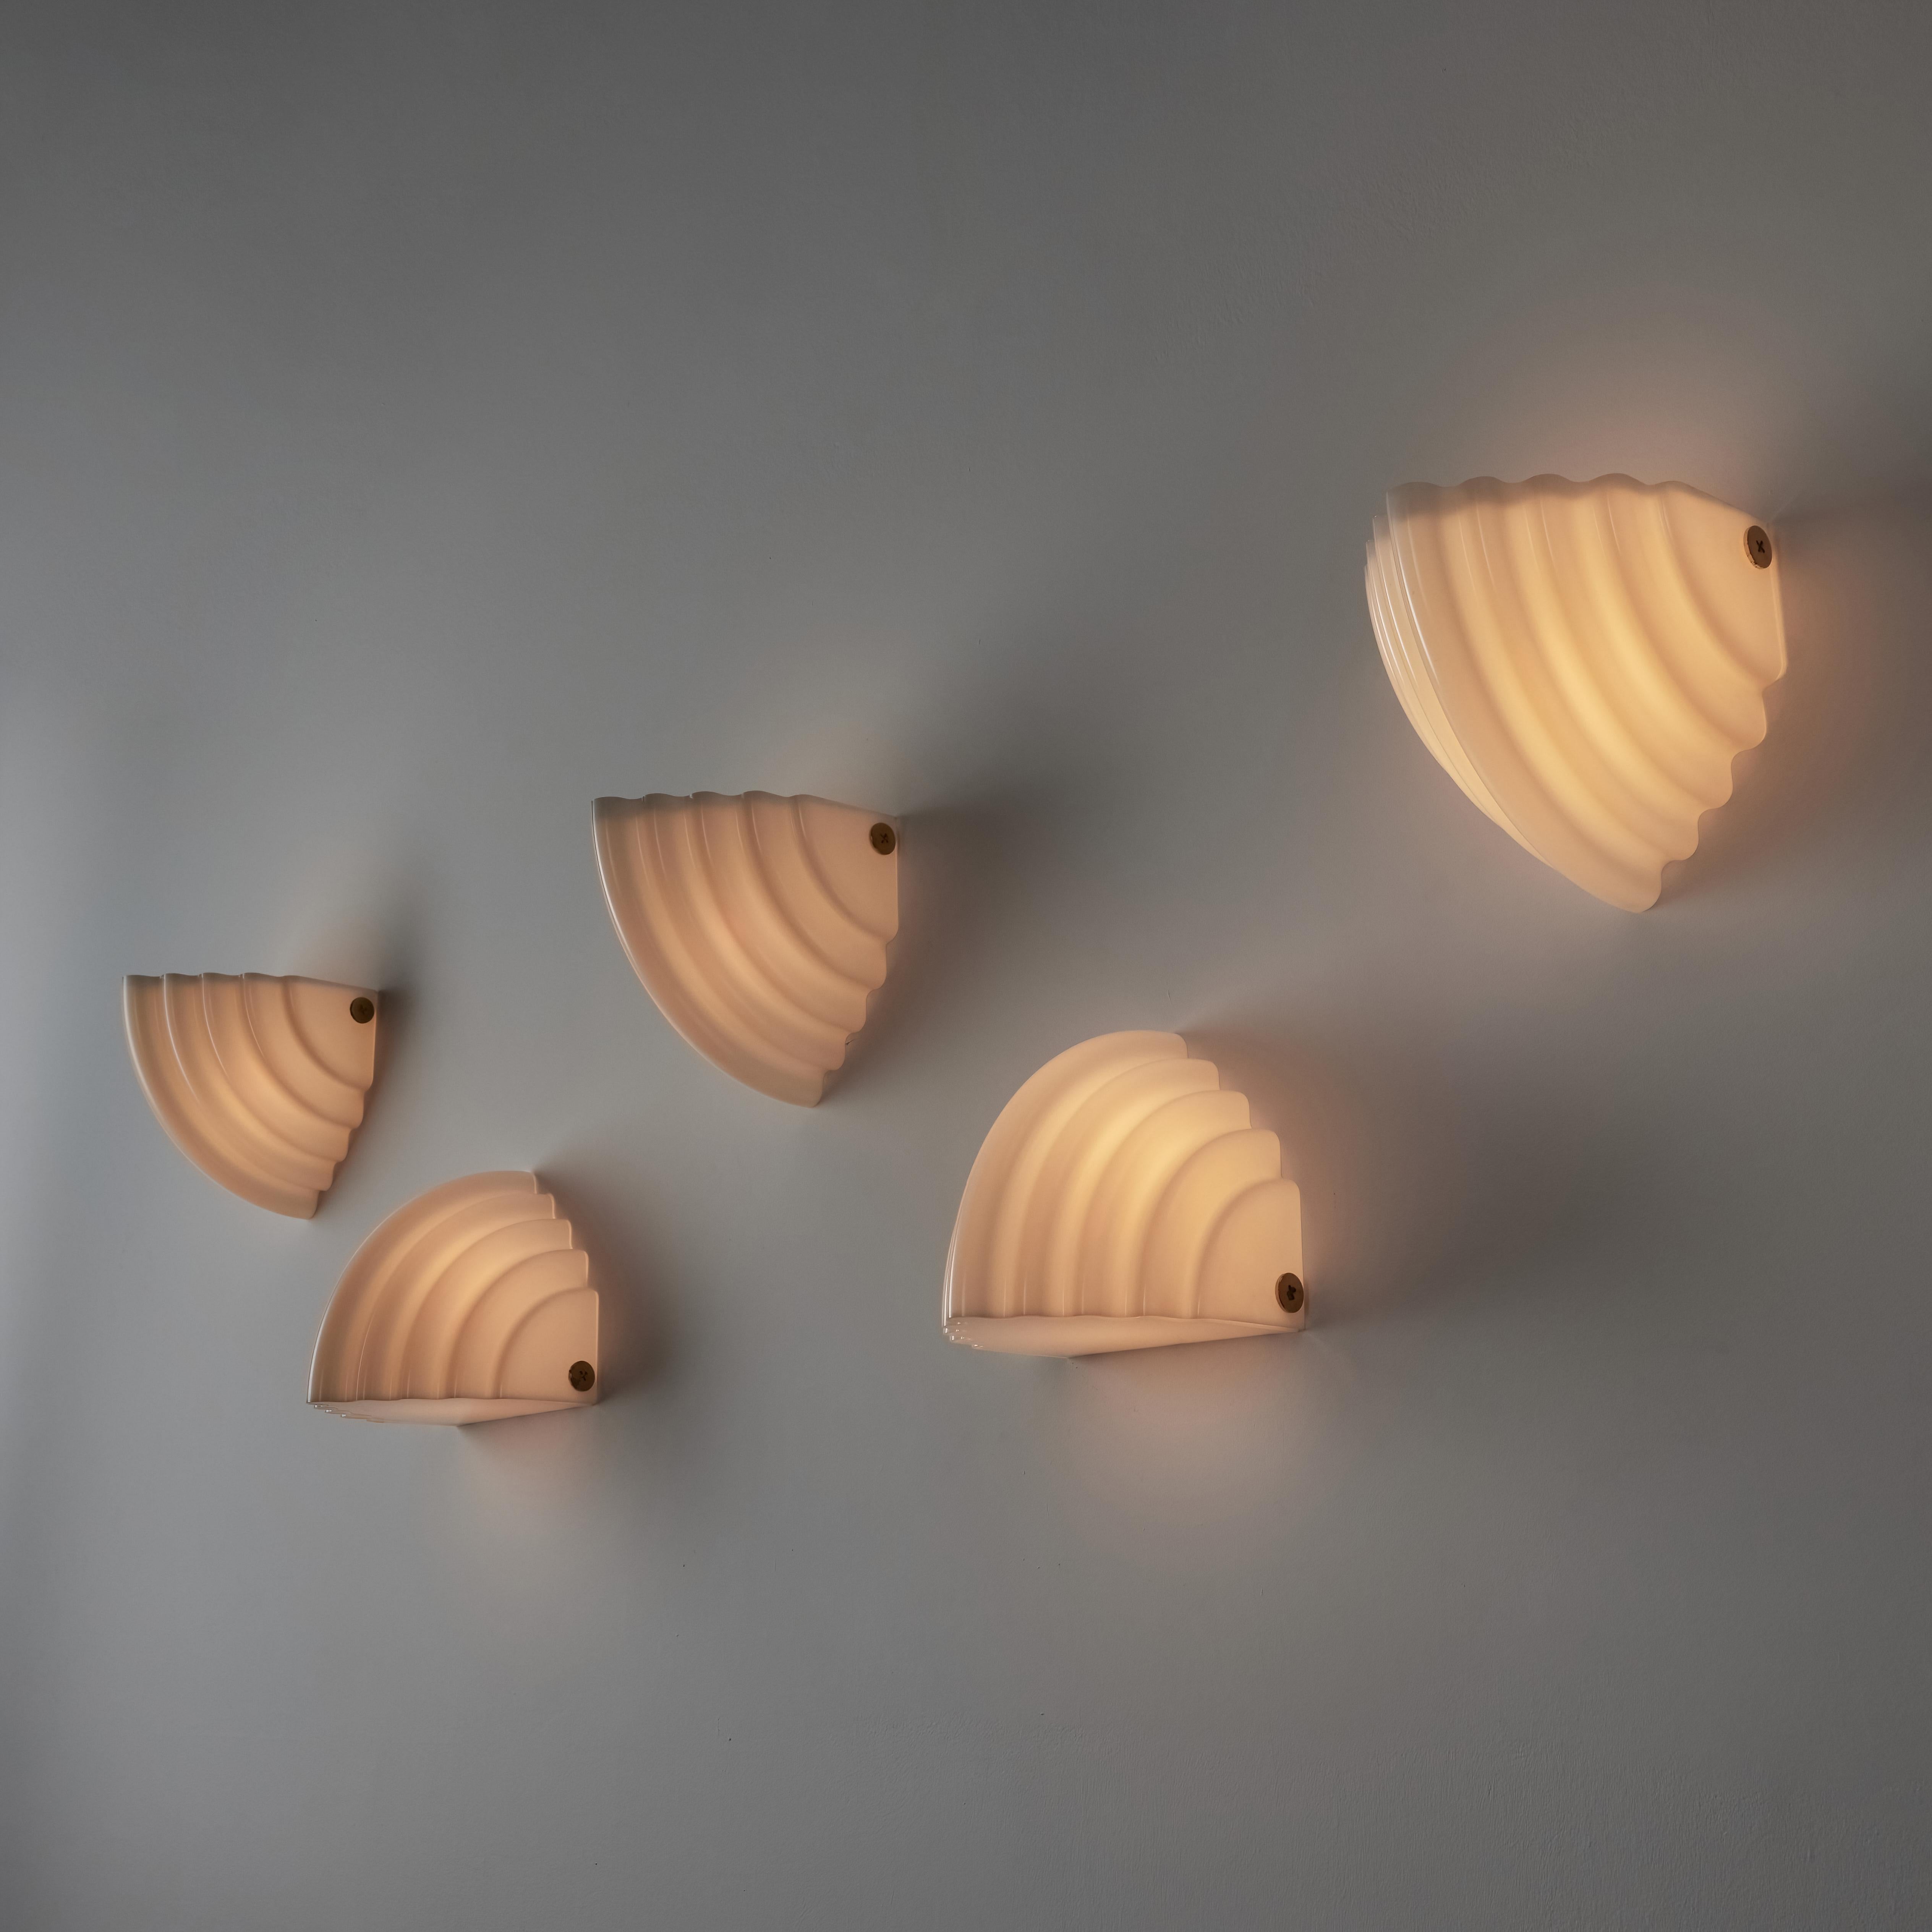  'Kai 2' sconces by Kazuhide Takahama for Sirrah. Designed and manufactured in Italy, circa the 1980s. Mollusc shaped molded acrylic shells make up the entire body of these contemporary sconces. As shown in the imagery, you are able to mount these